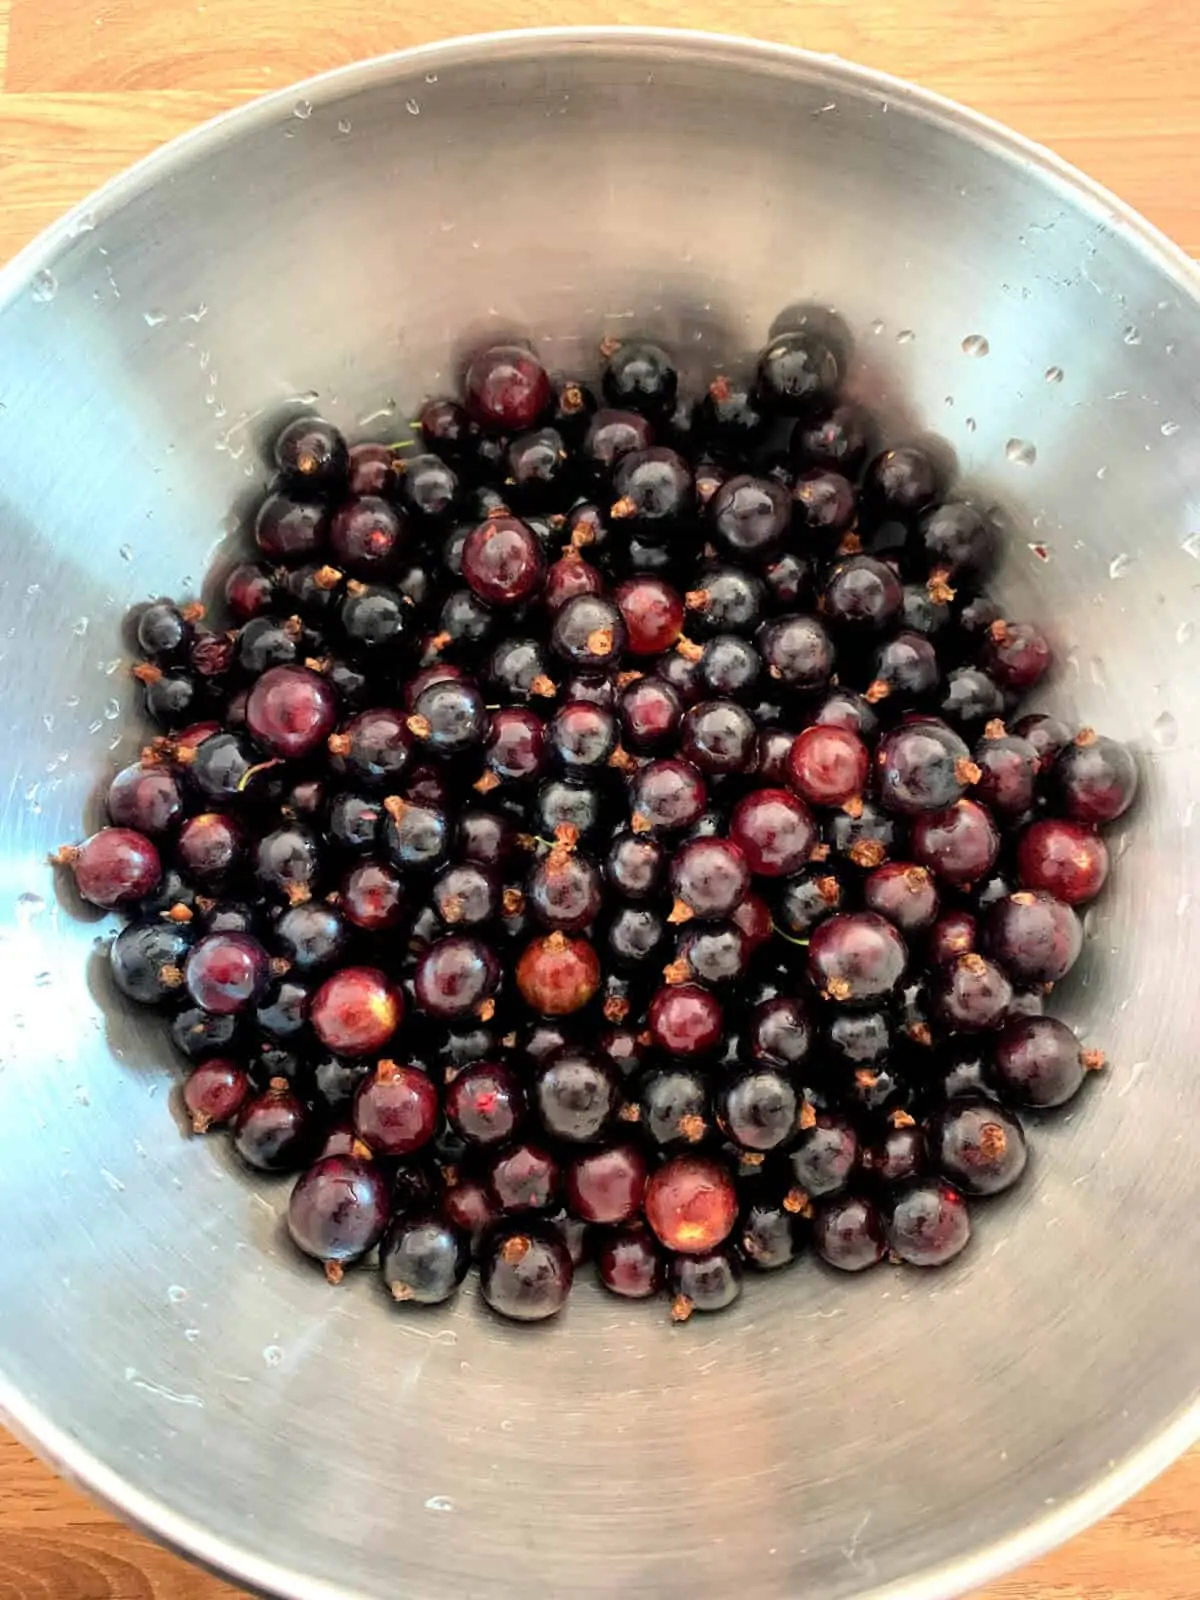 Washed blackcurrants in a metal bowl.